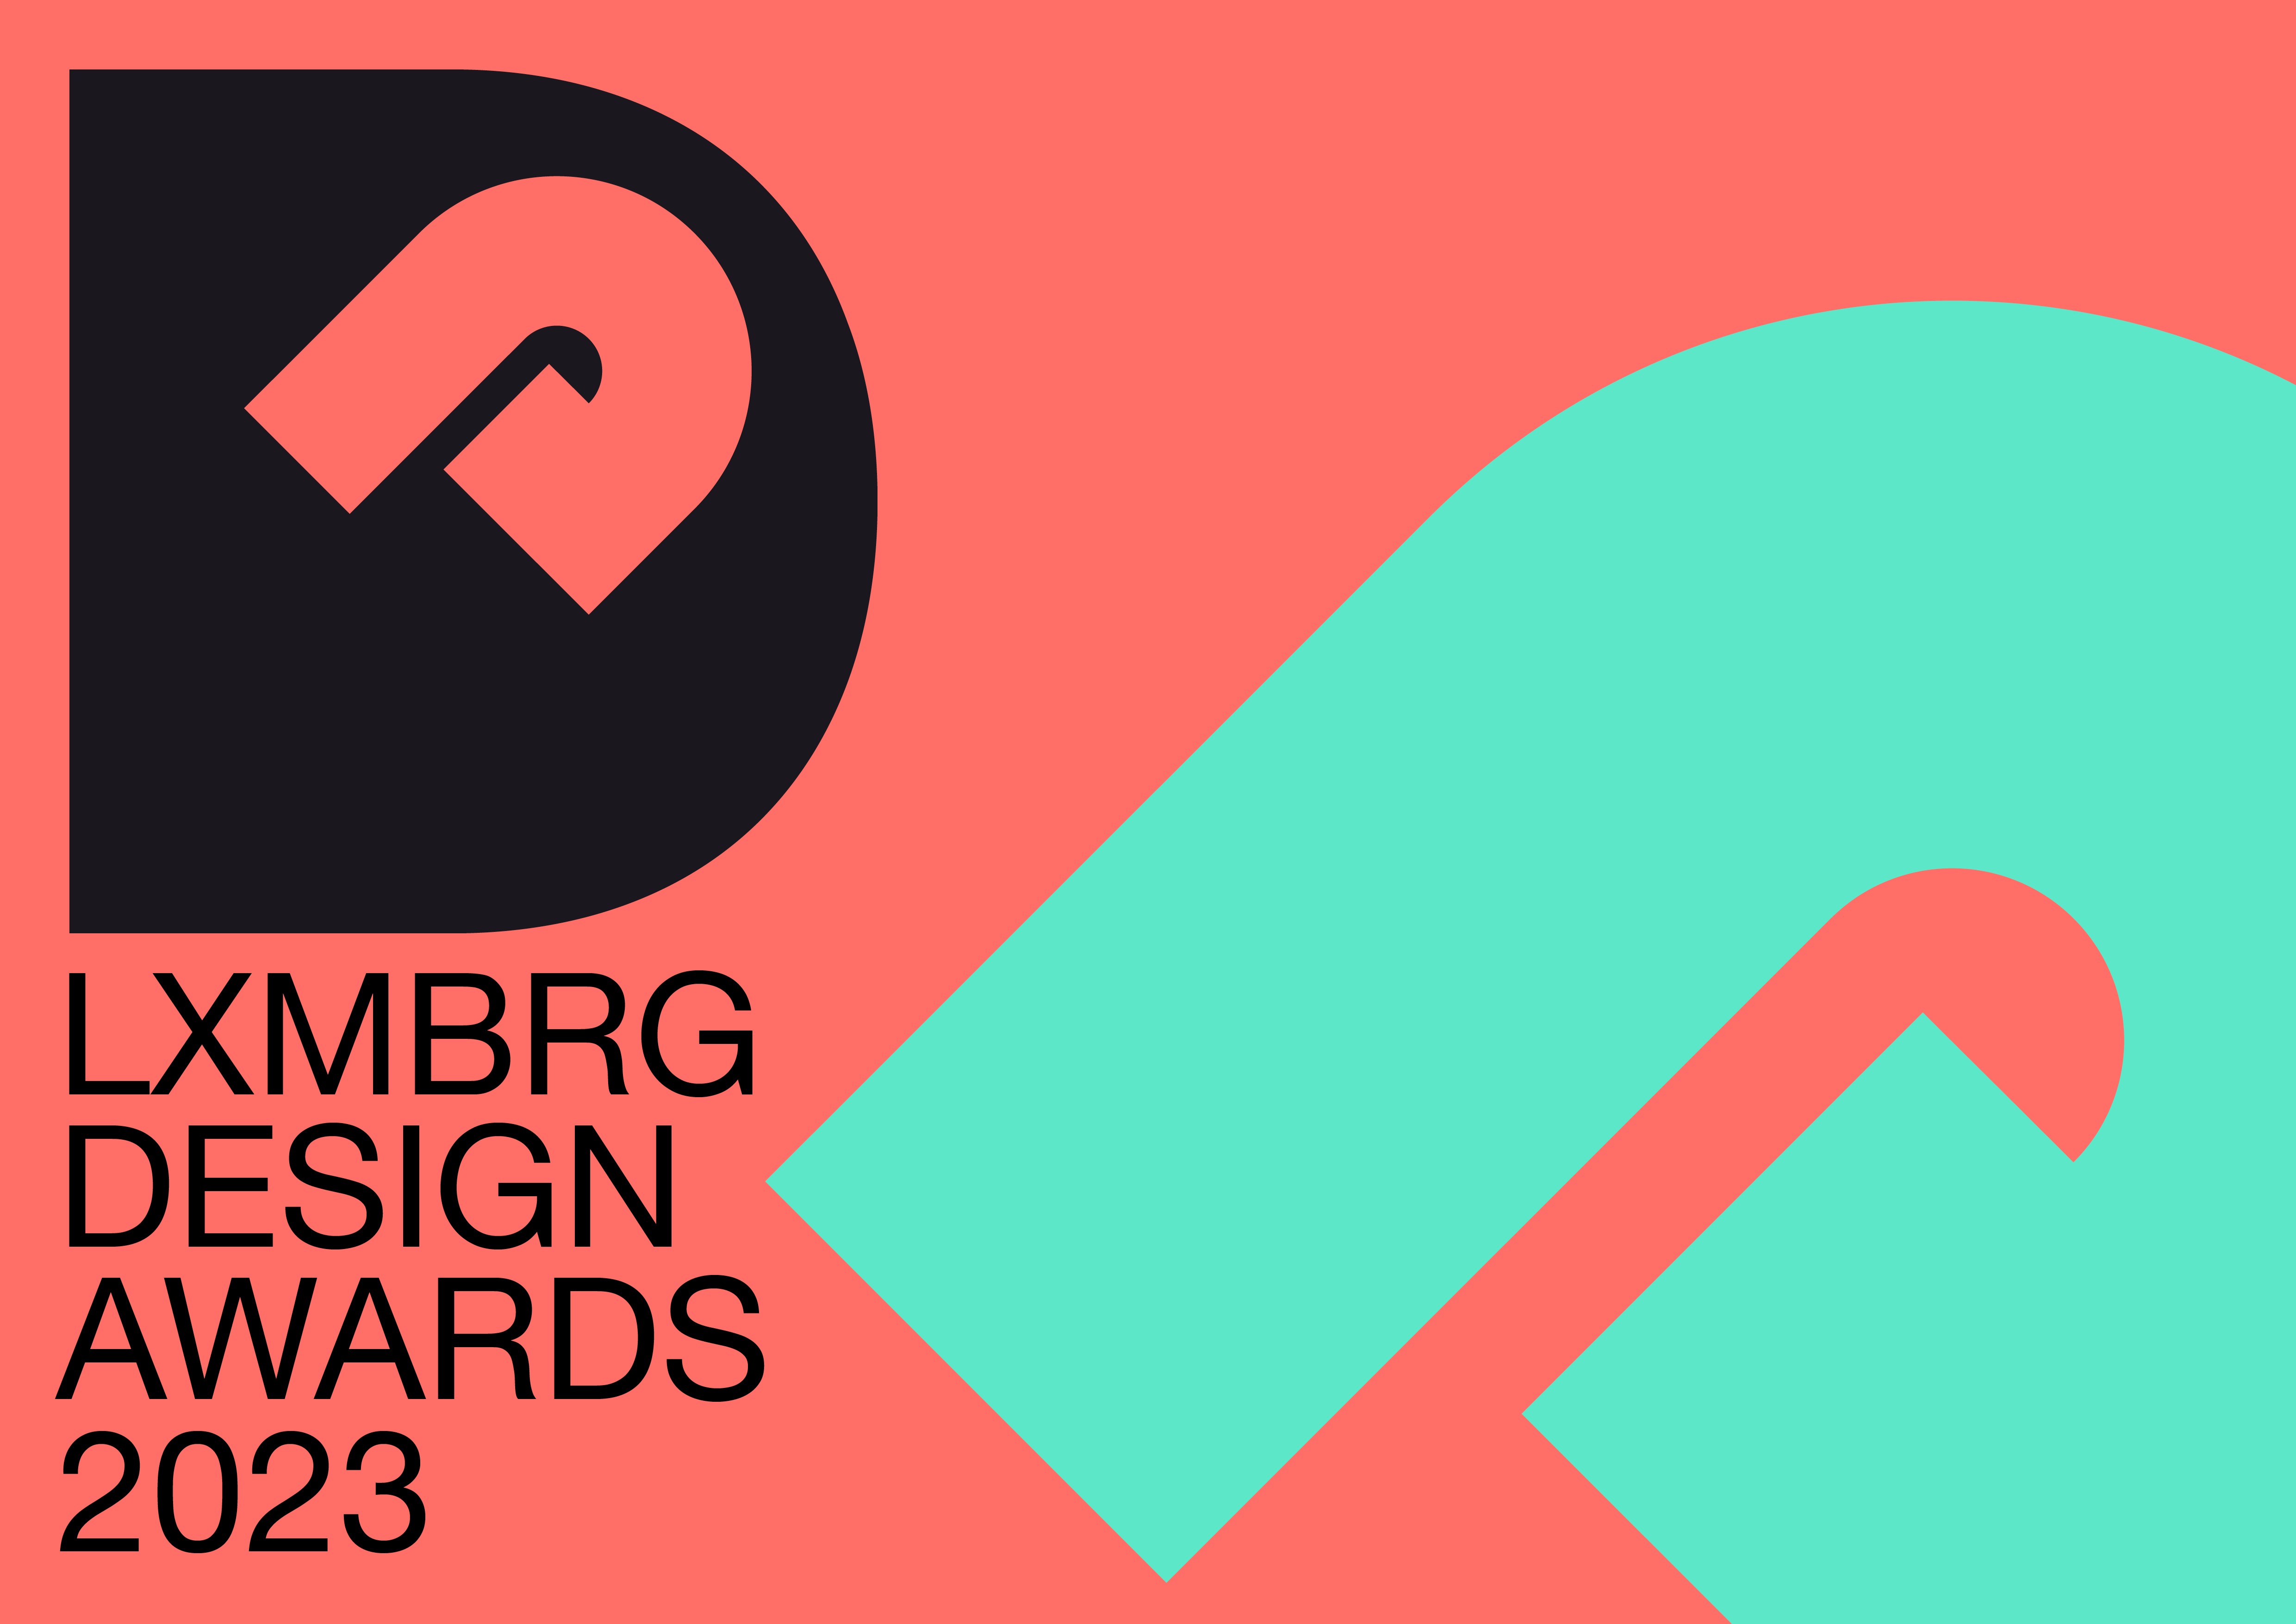 LUXEMBOURG DESIGN AWARDS